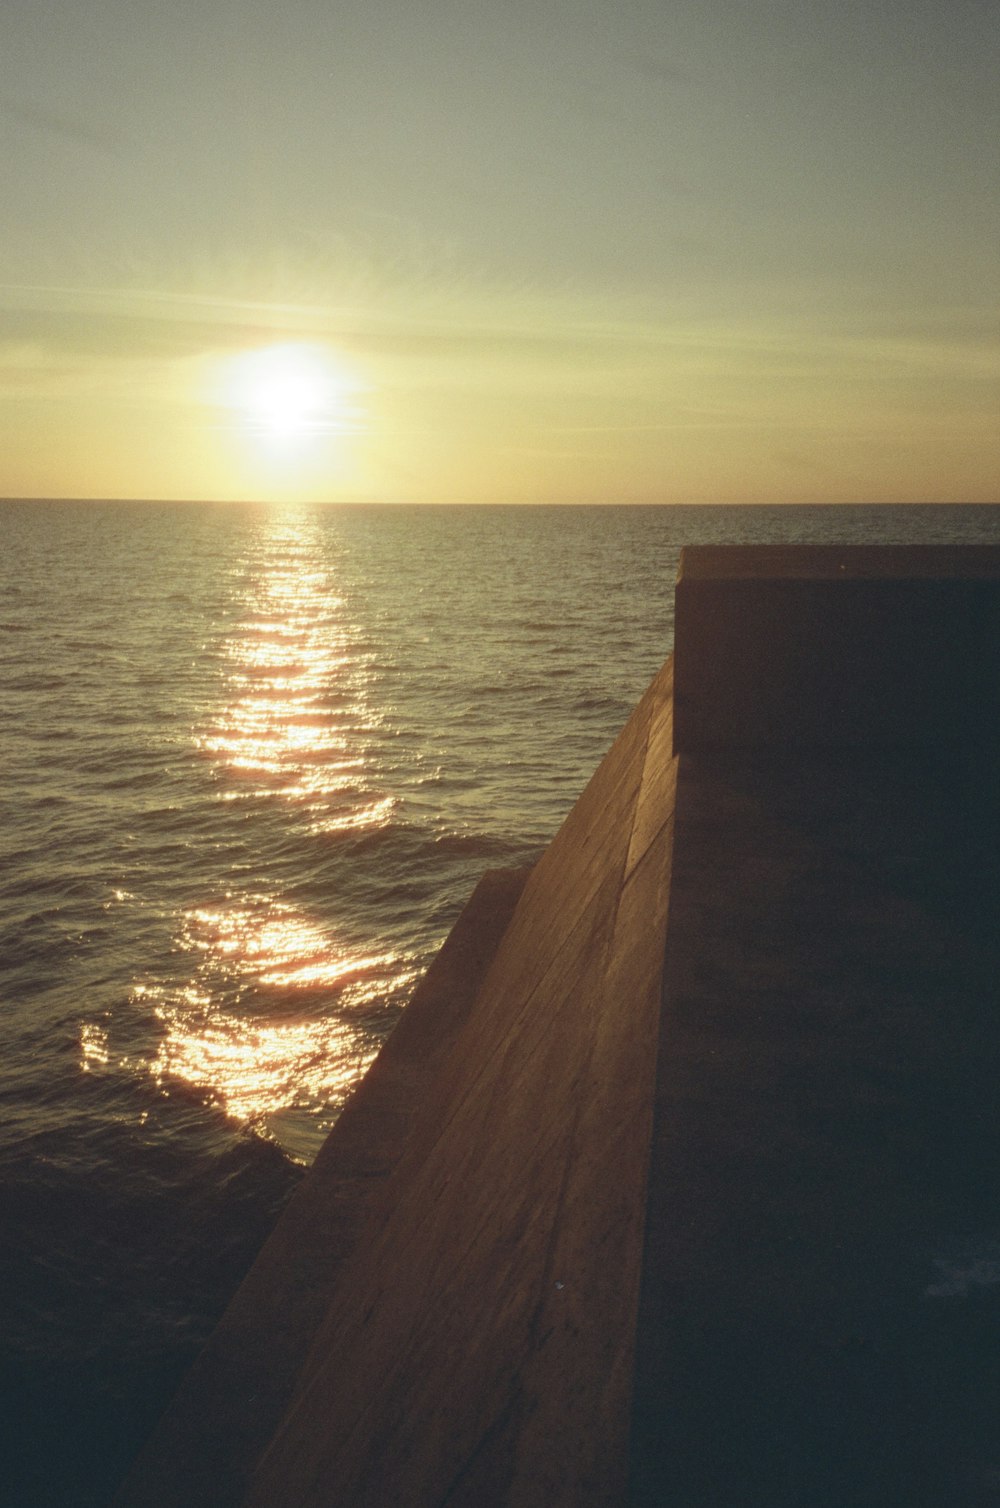 the sun is setting over the water from a pier